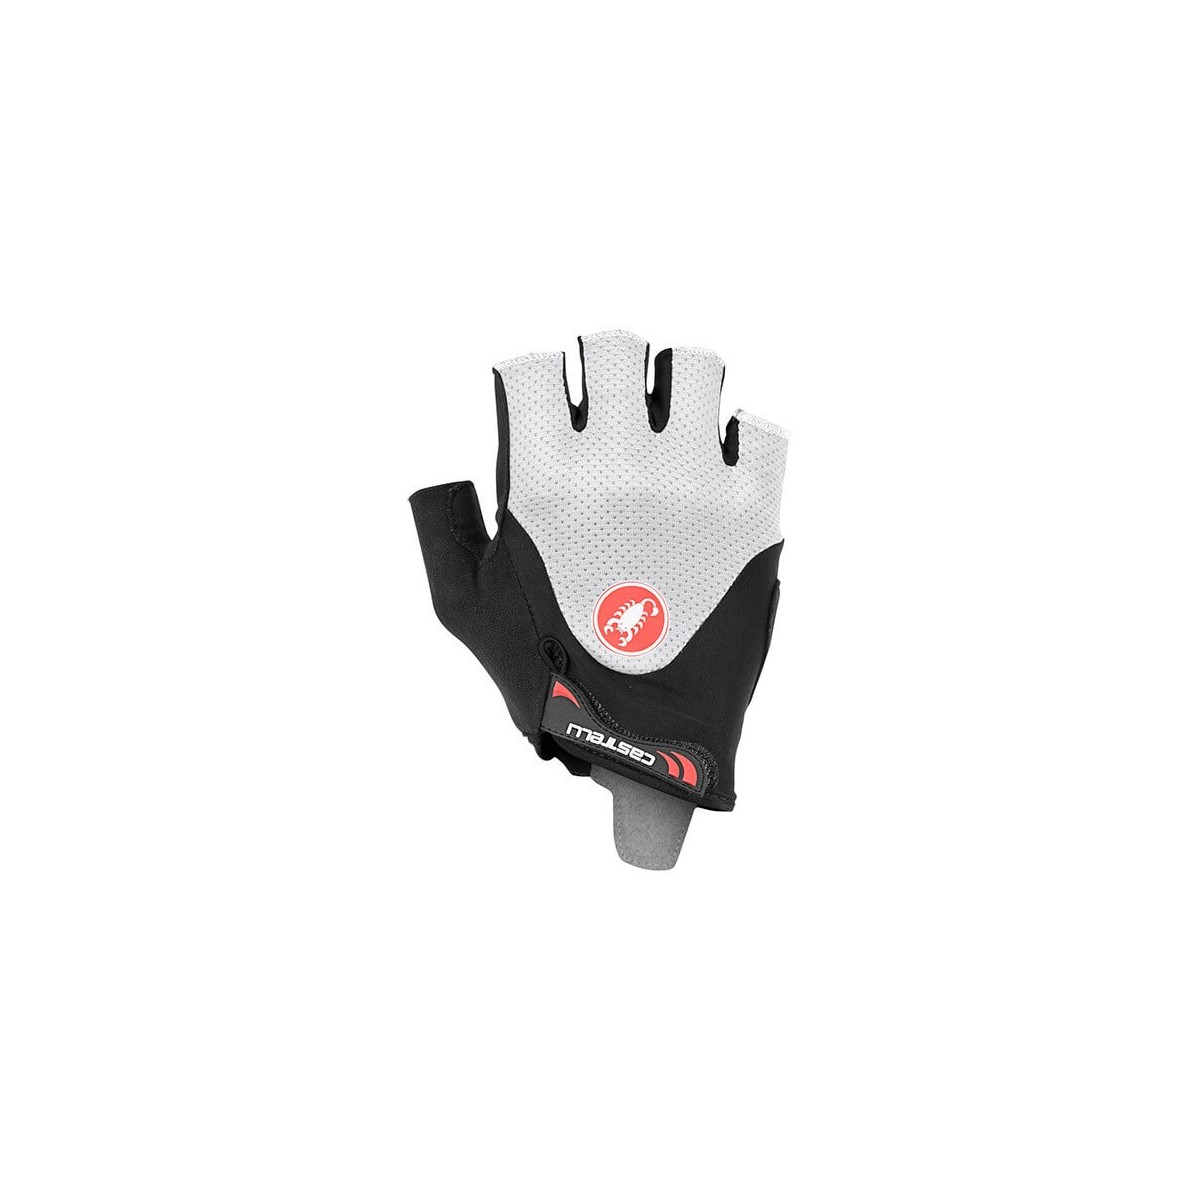 Photos - Cycling Gloves Castelli Arenberg Gel 2 Rosso Corsa Short Gloves Black White, Size M 45190 